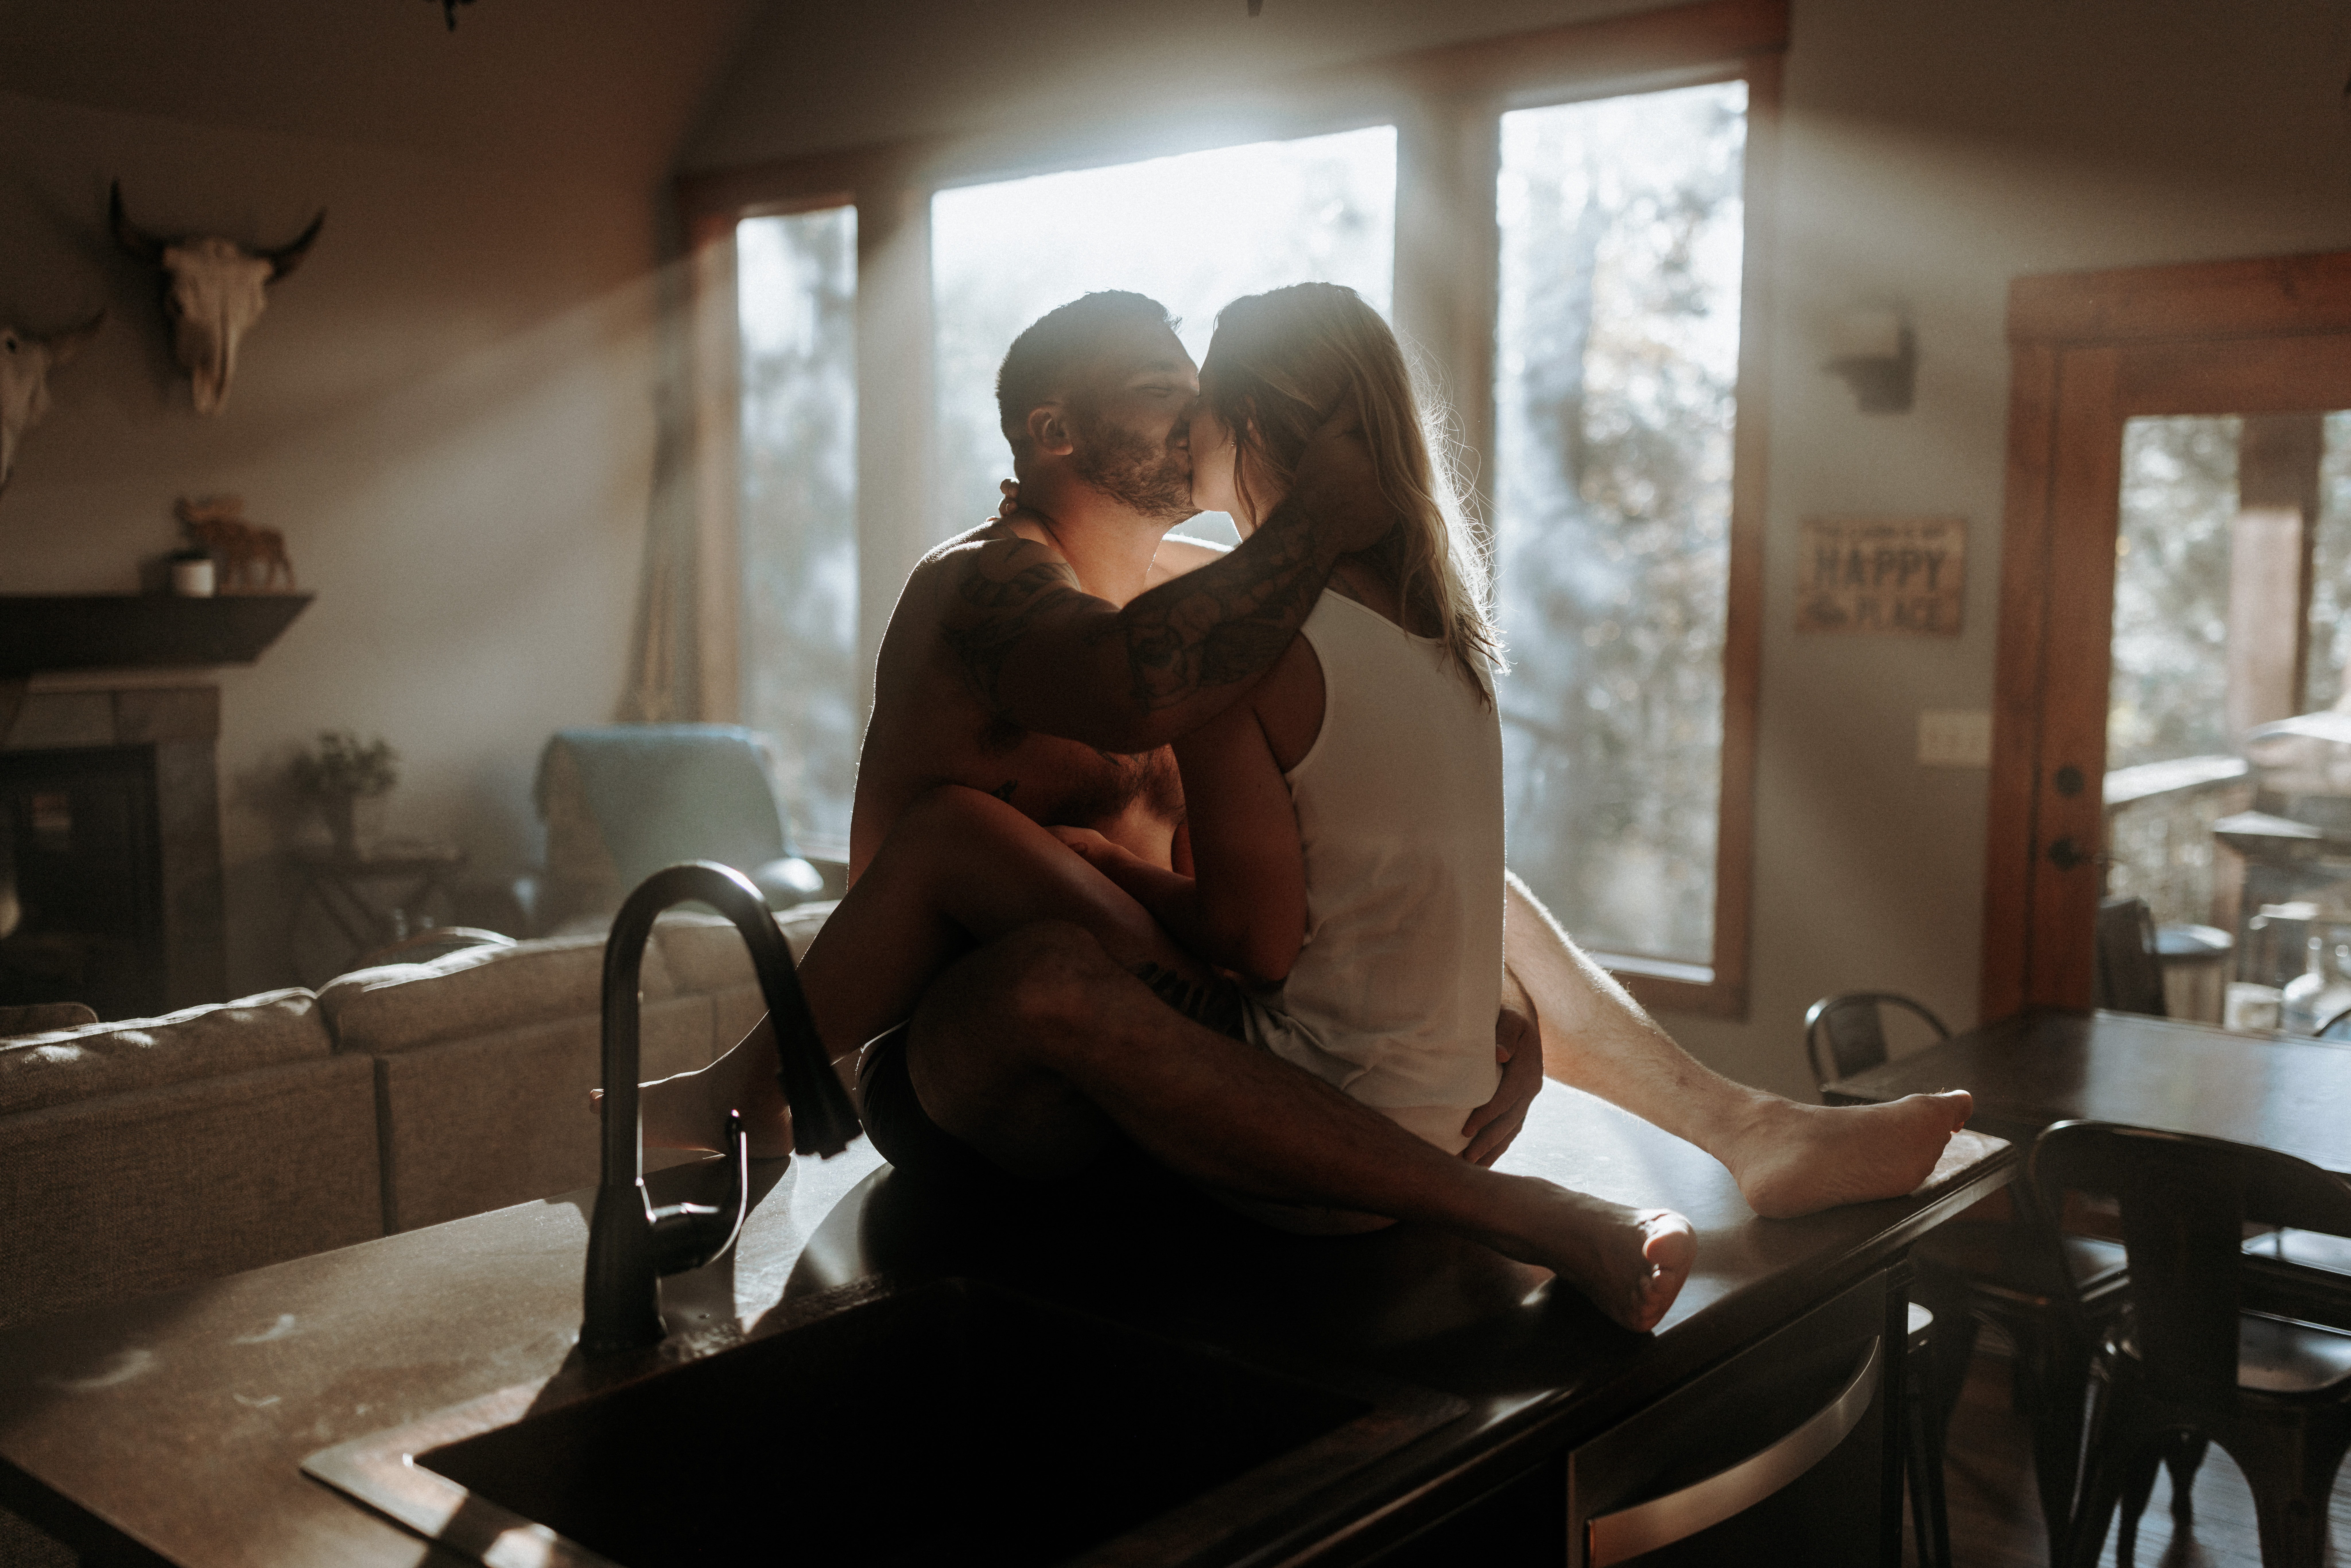 A man and woman on a kitchen counter in their underwear.